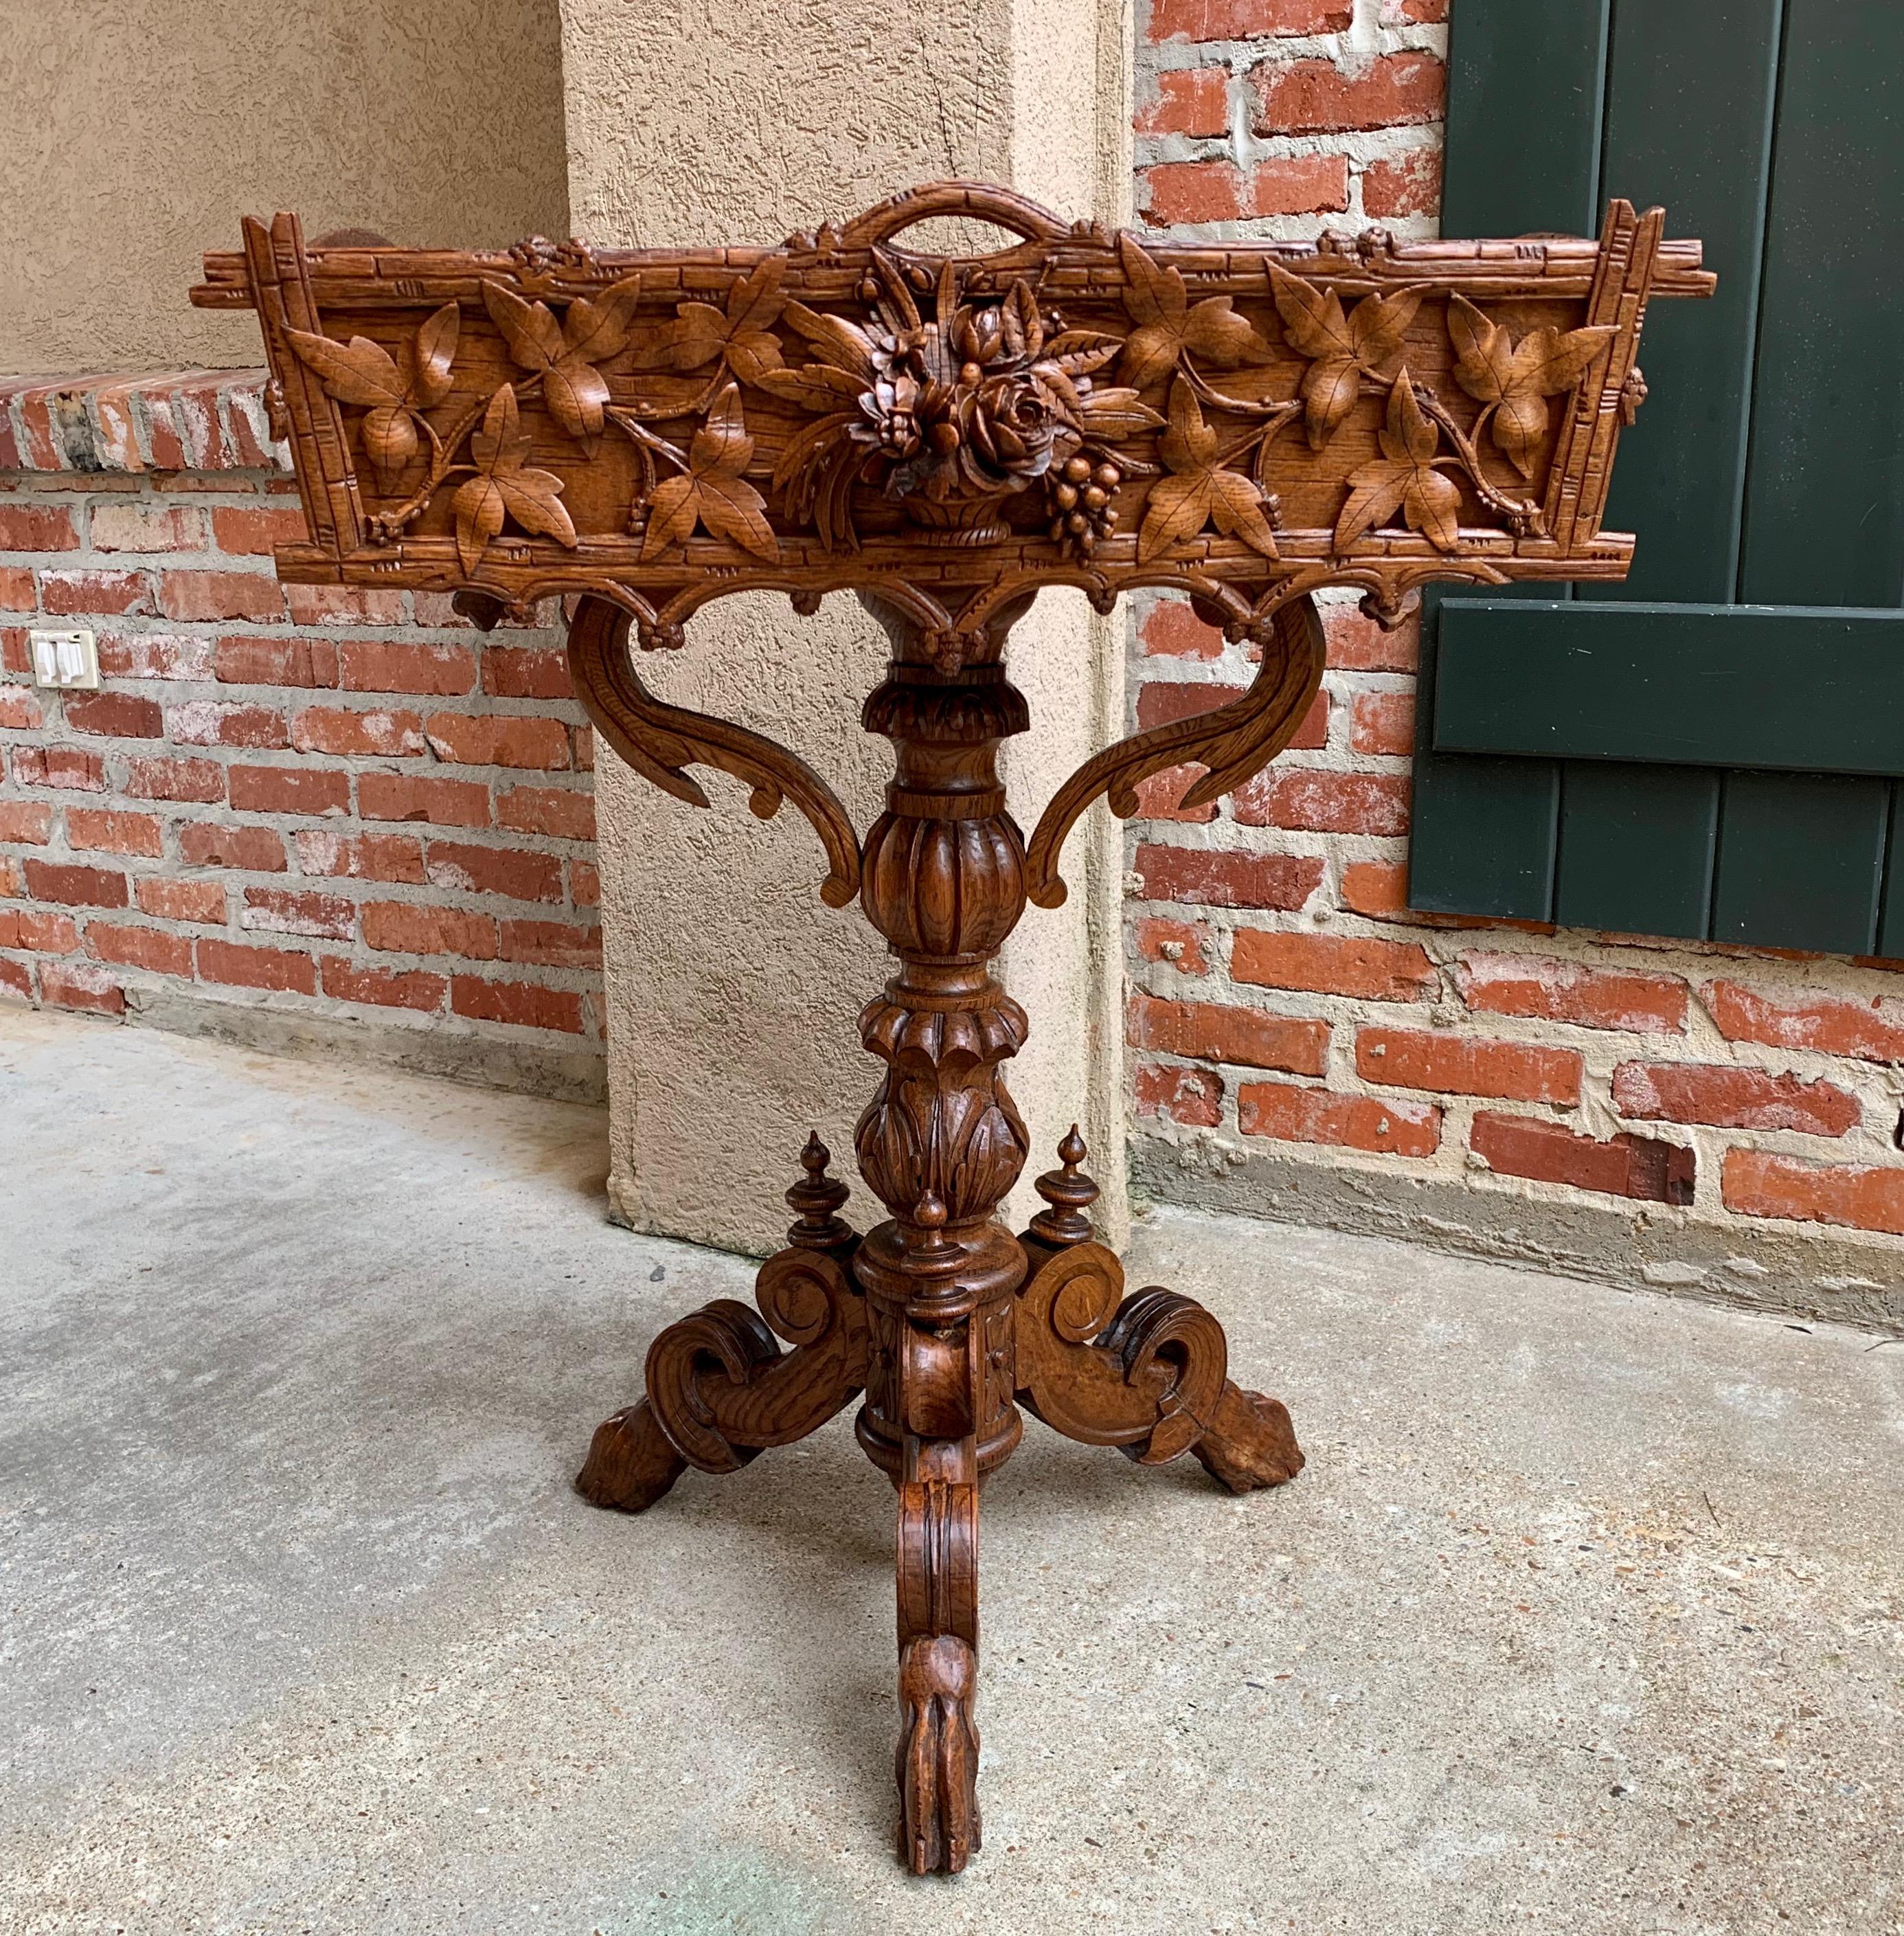 Direct from France, a lovely antique French Black Forest planter, jardinière, with exceptional carvings and details!
~ The stand body has outstanding carvings with the center a dimensional carved bouquet of roses/flowers that extends 2” beyond the